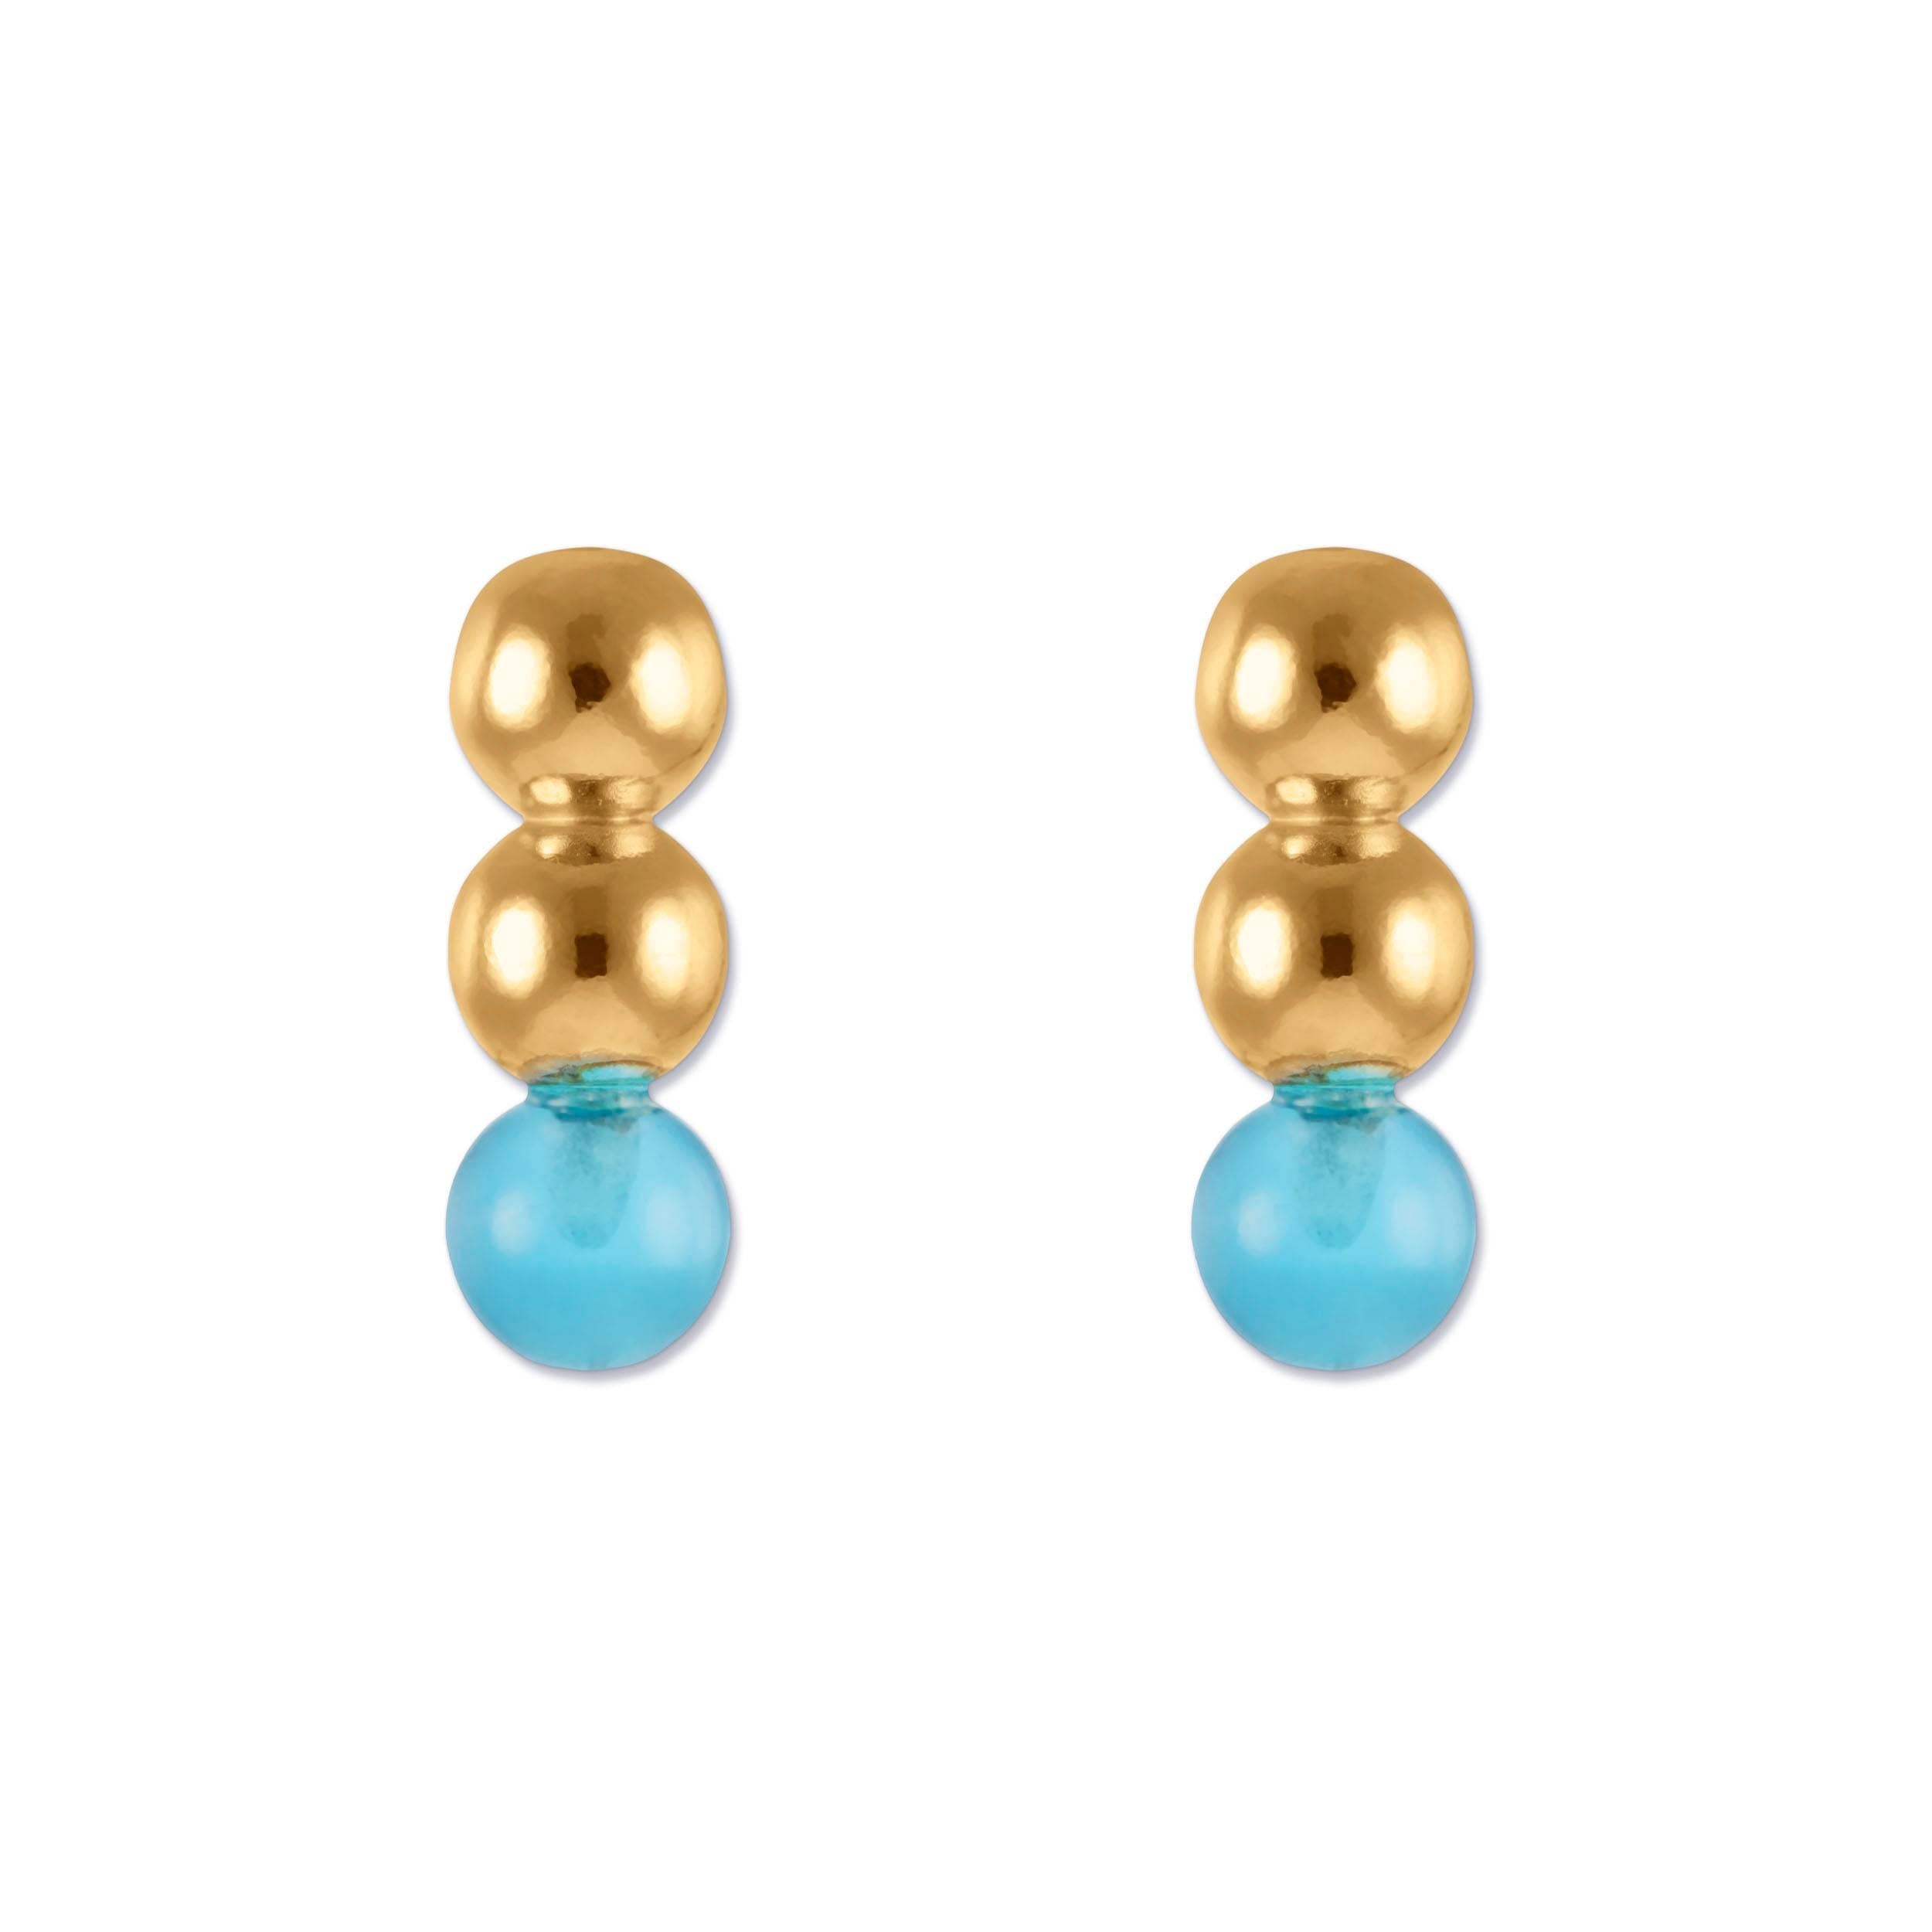 New to this season and so much fun! These fantastic earrings are already proving quite popular due to their great affordability. They come in either 18kt yellow gold or 18kt rose gold vermeil in a variety of handmade colourful (AAA) quartz stones